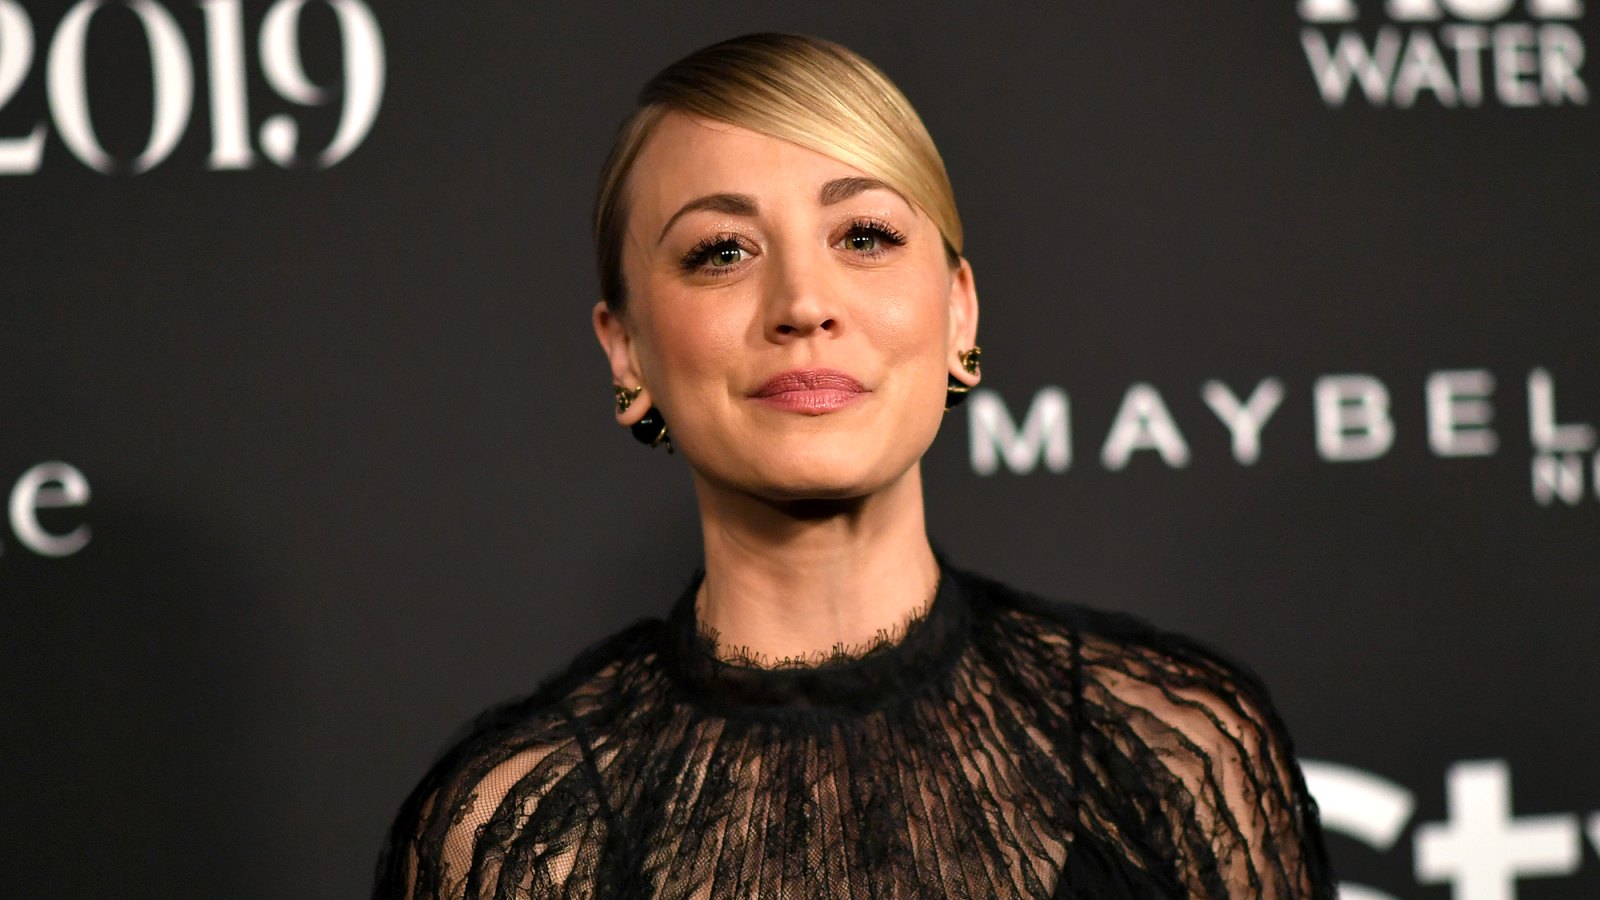 Kaley Cuoco Will ‘Never’ Get Married Again After Ryan Sweeting and Karl Cook Divorces: ‘Absolutely Not’